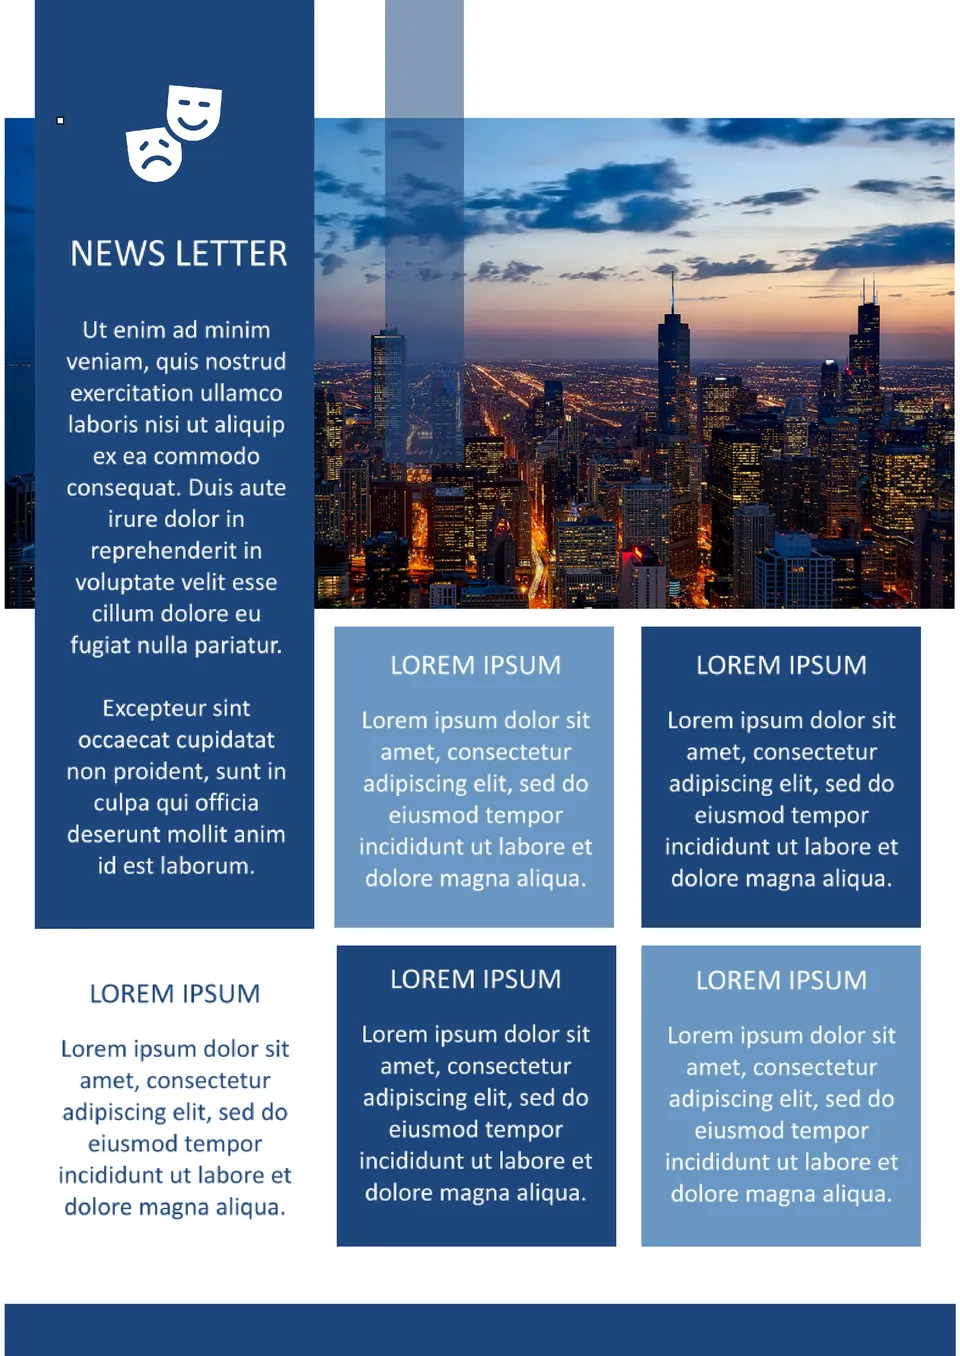 News Letter Template